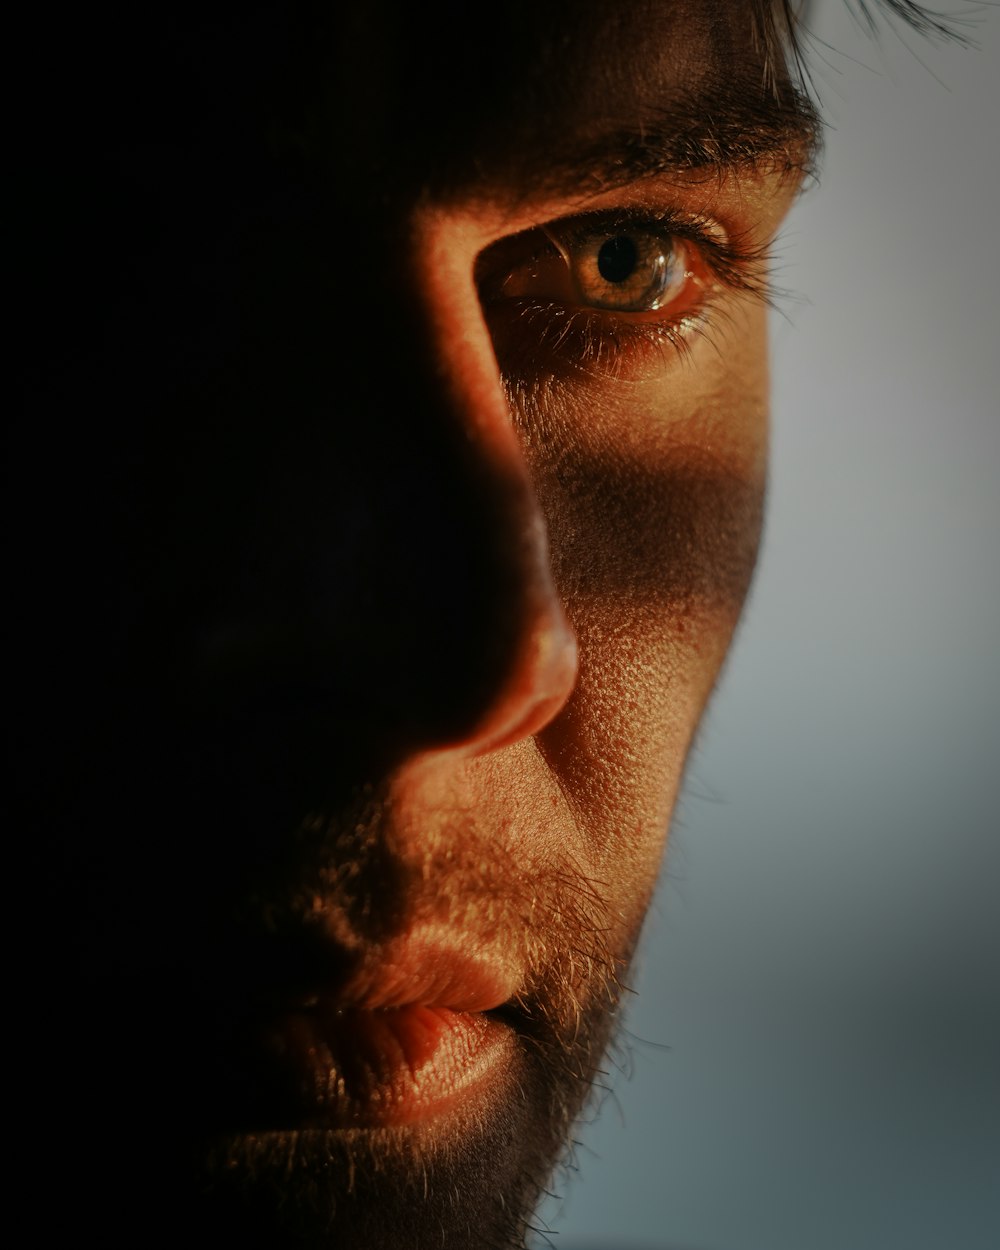 a close up of a man's face with a cell phone in his hand